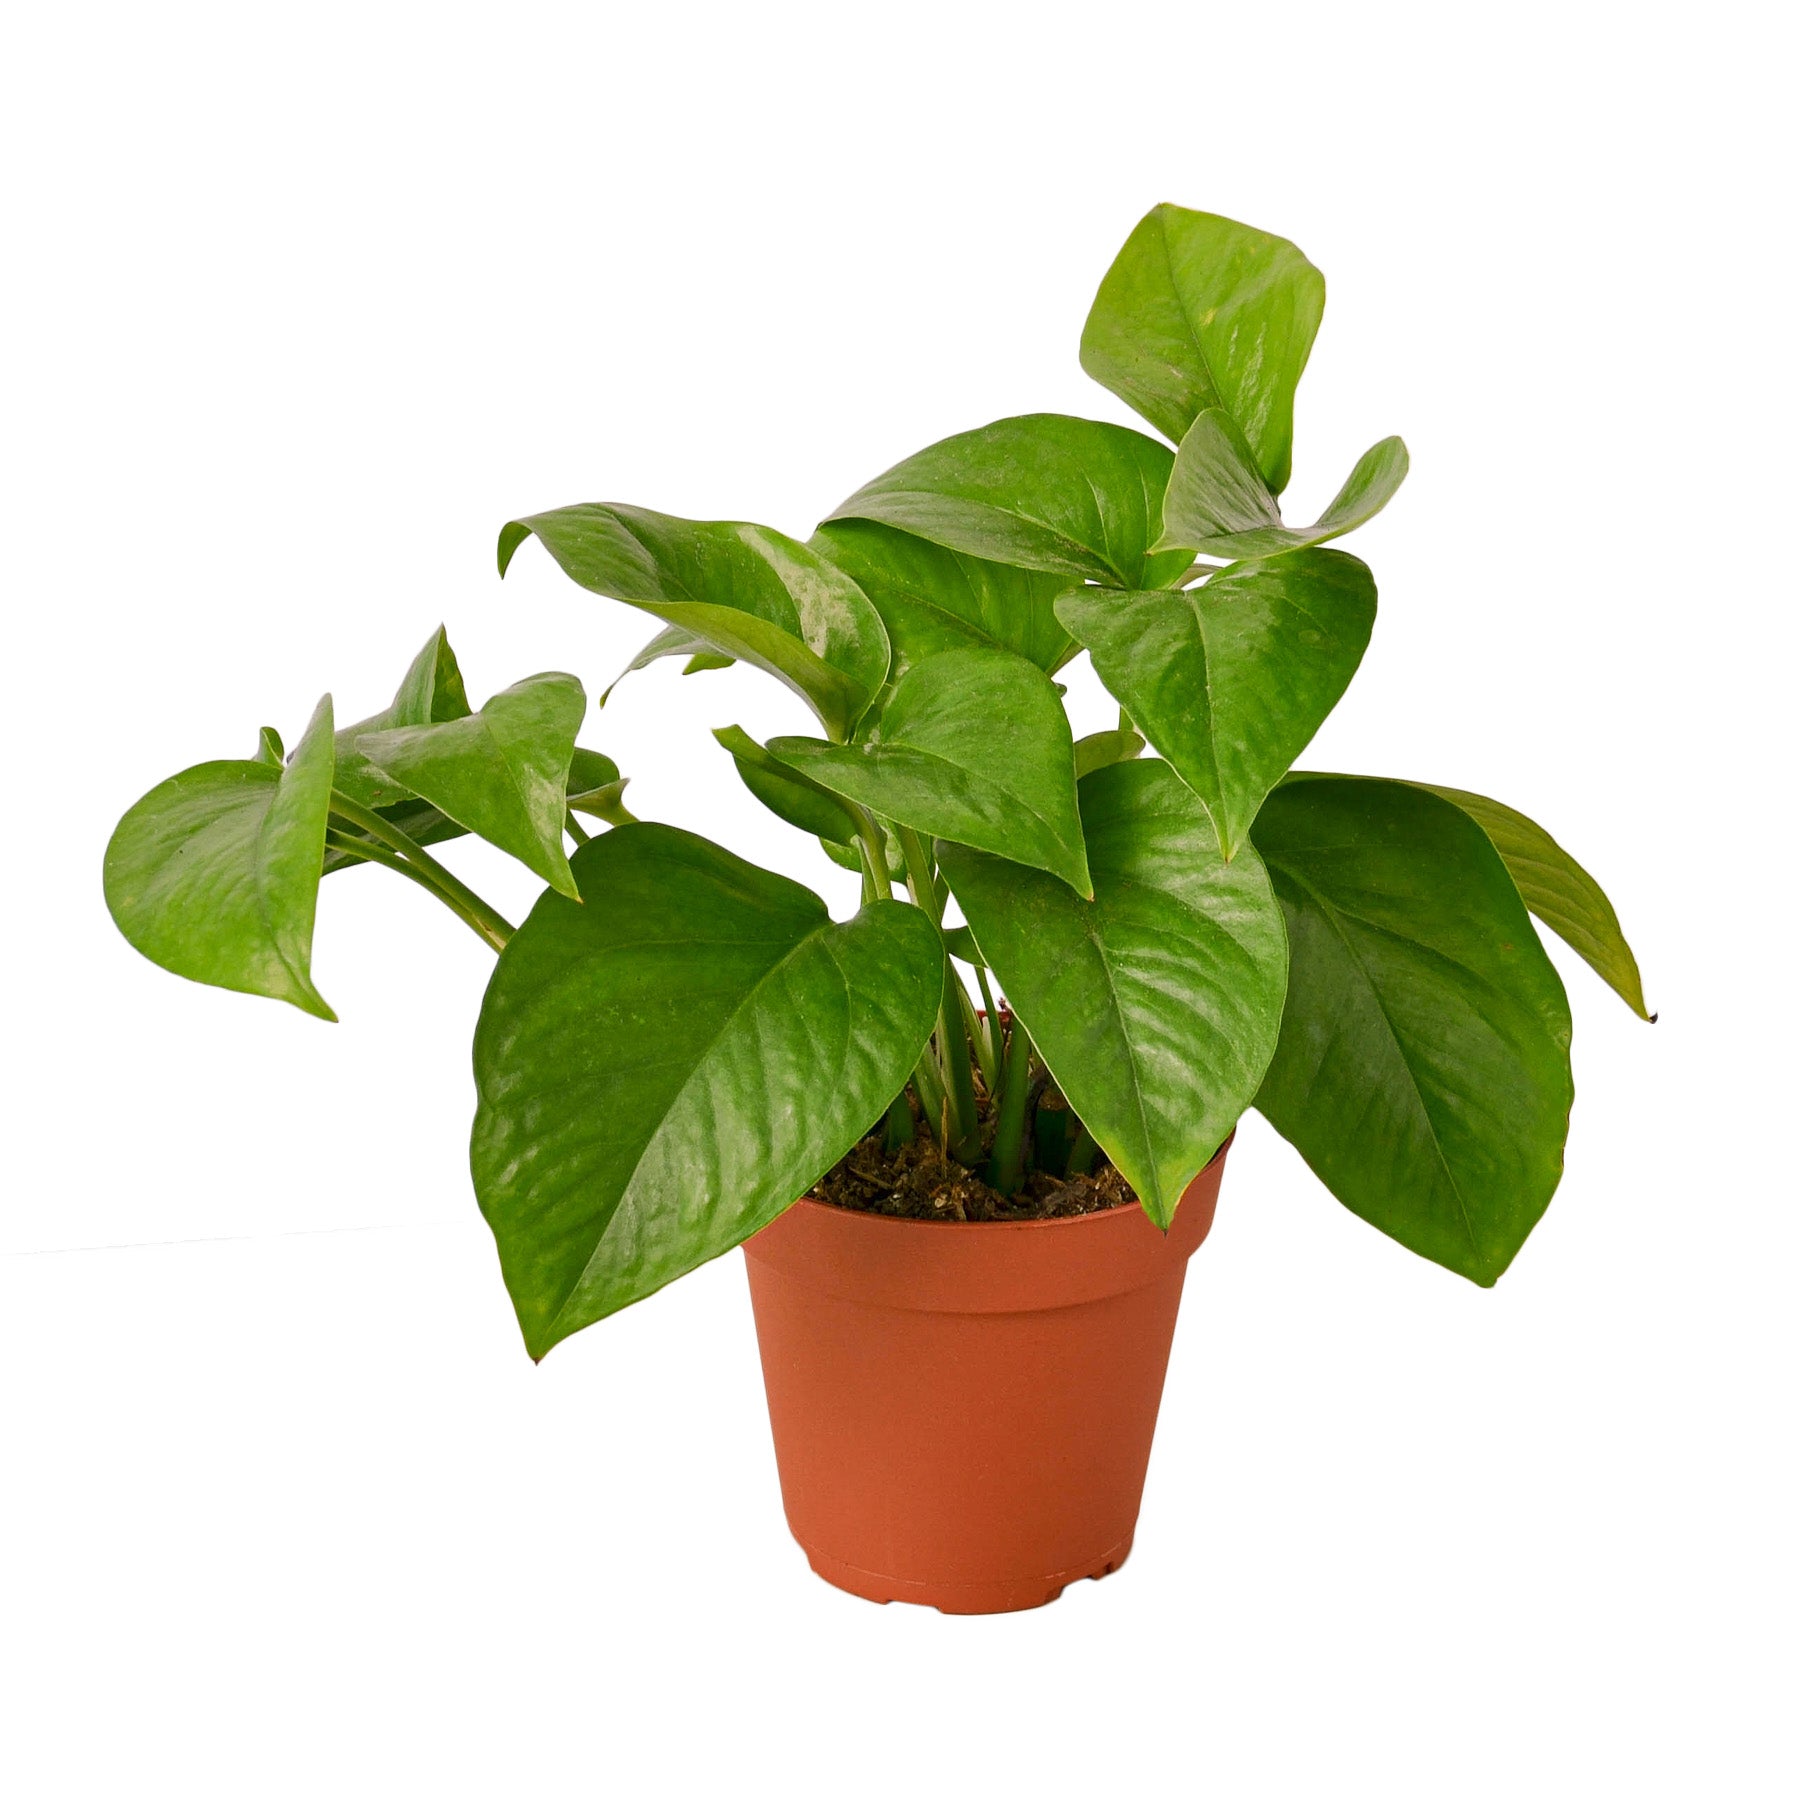 A white potted plant on a white background.